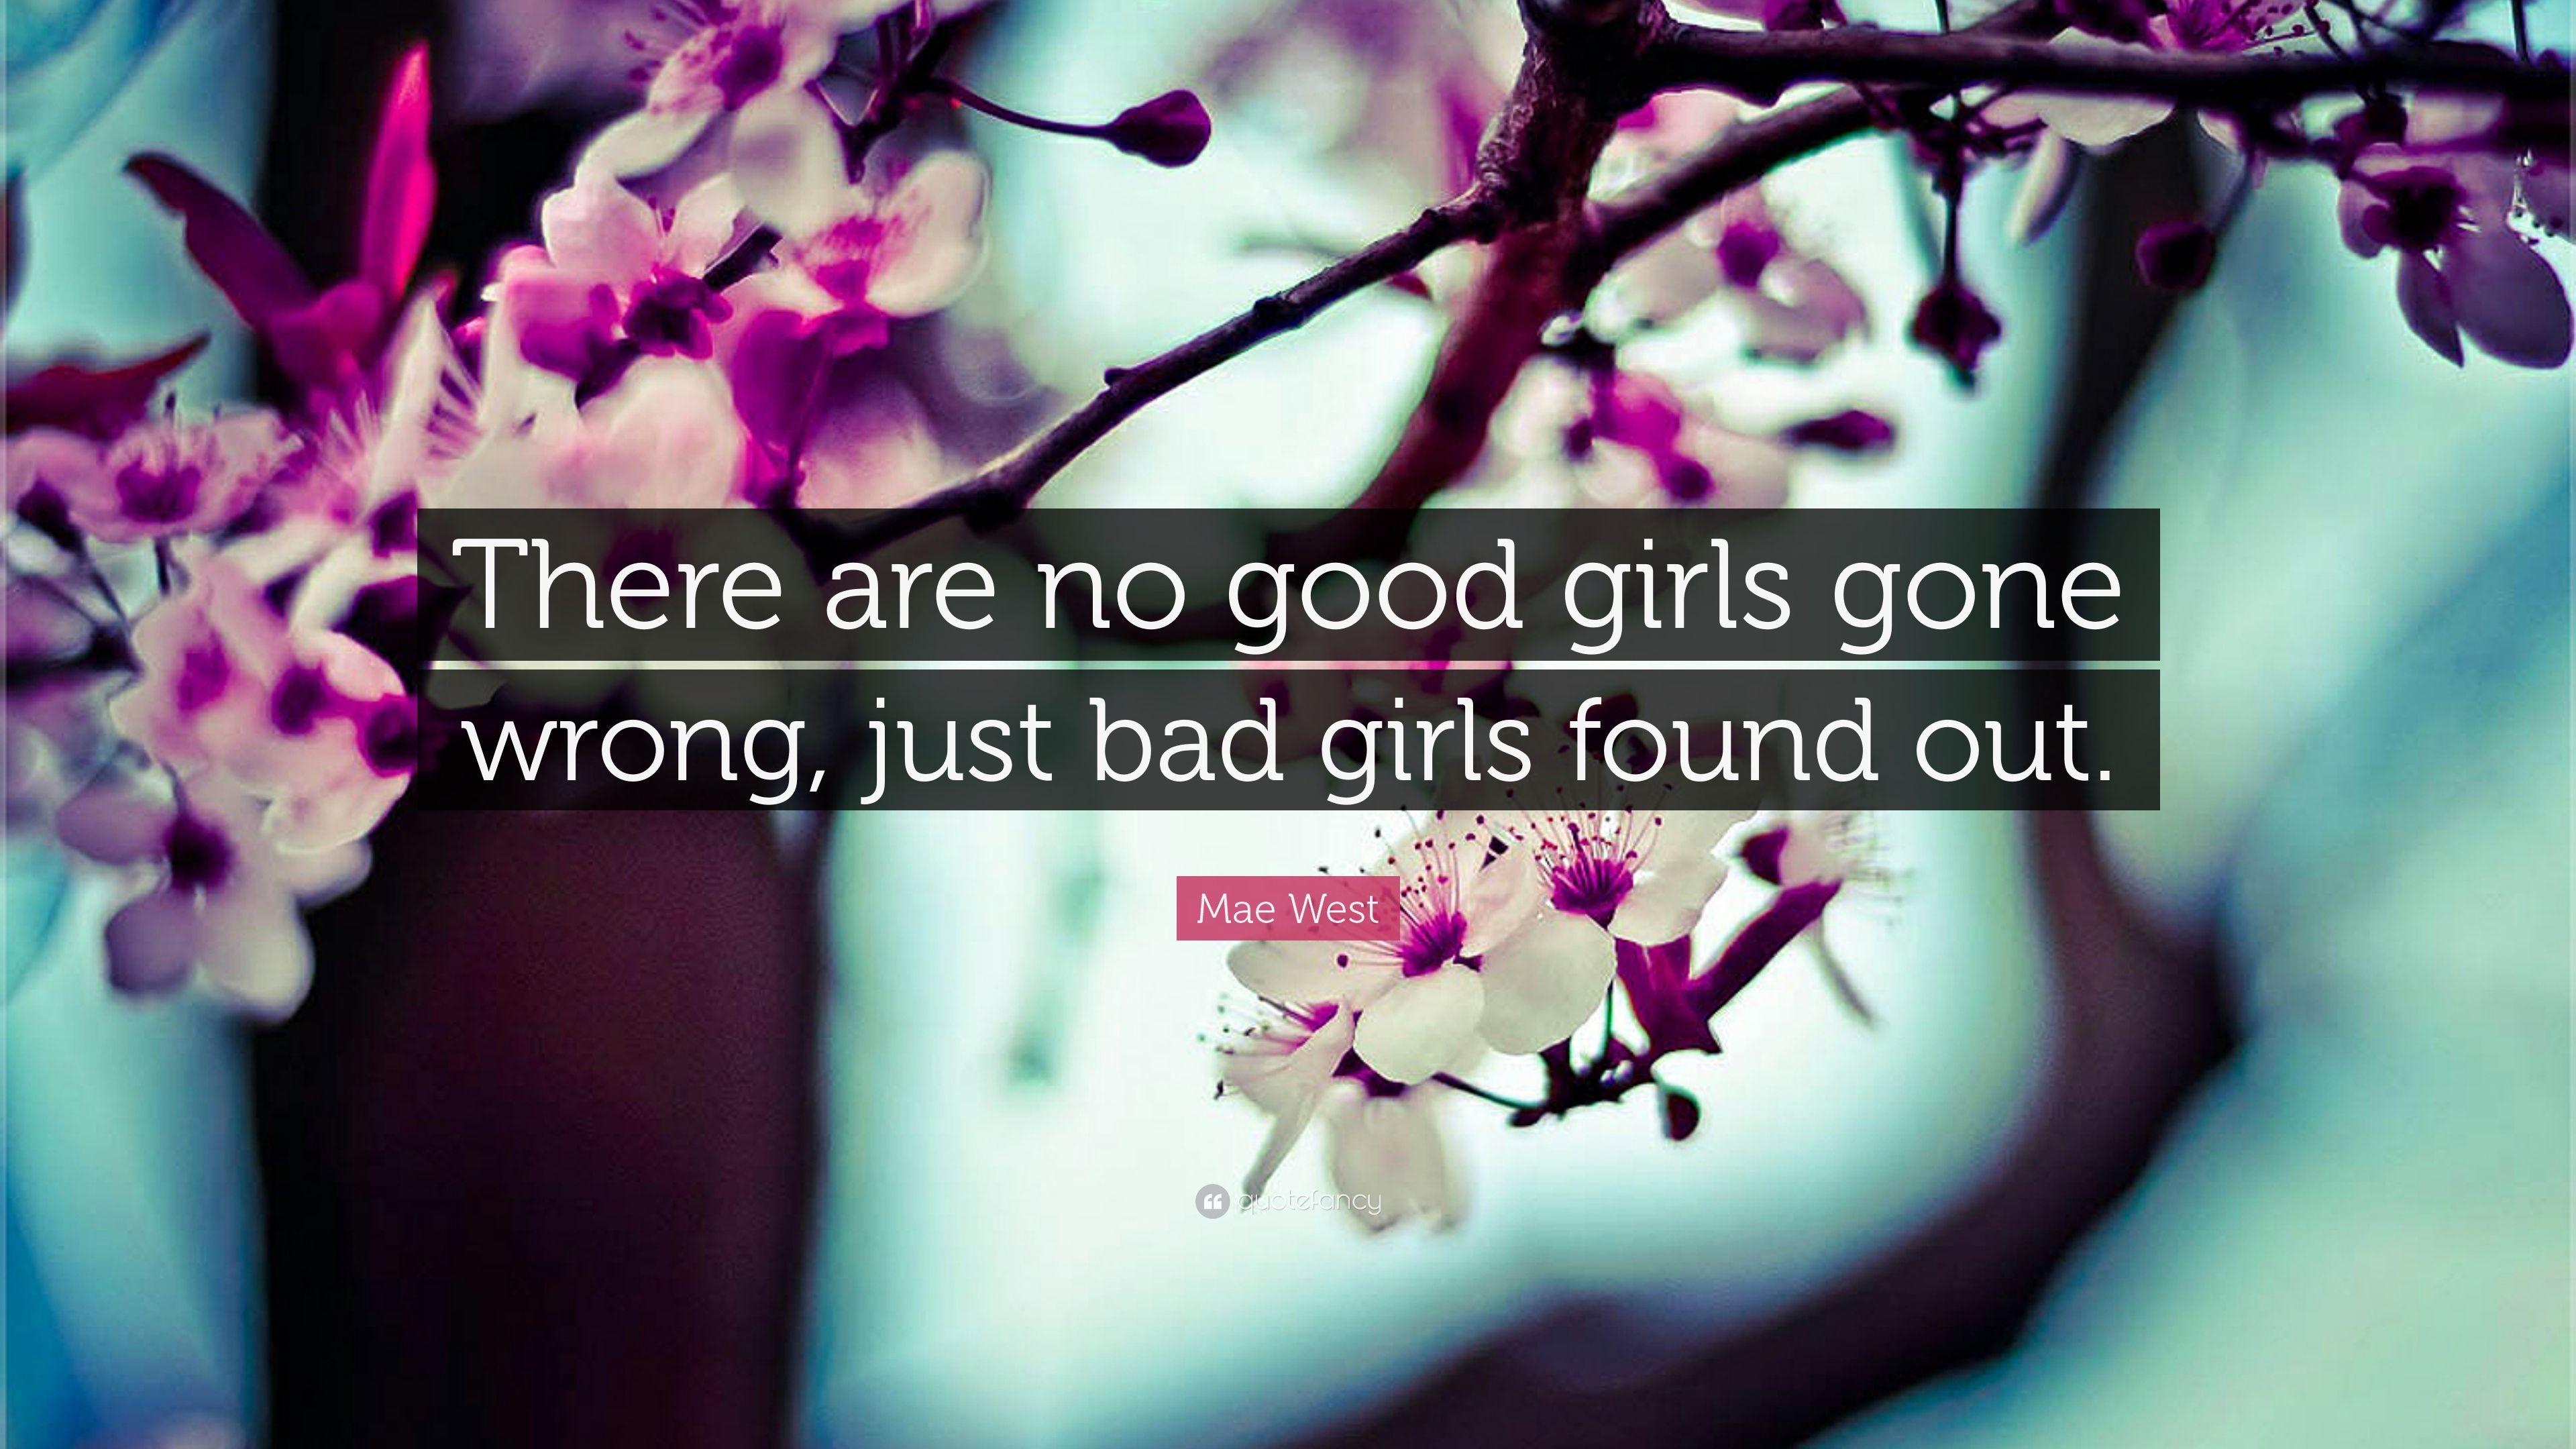 Mae West Quote: “There are no good girls gone wrong, just bad girls